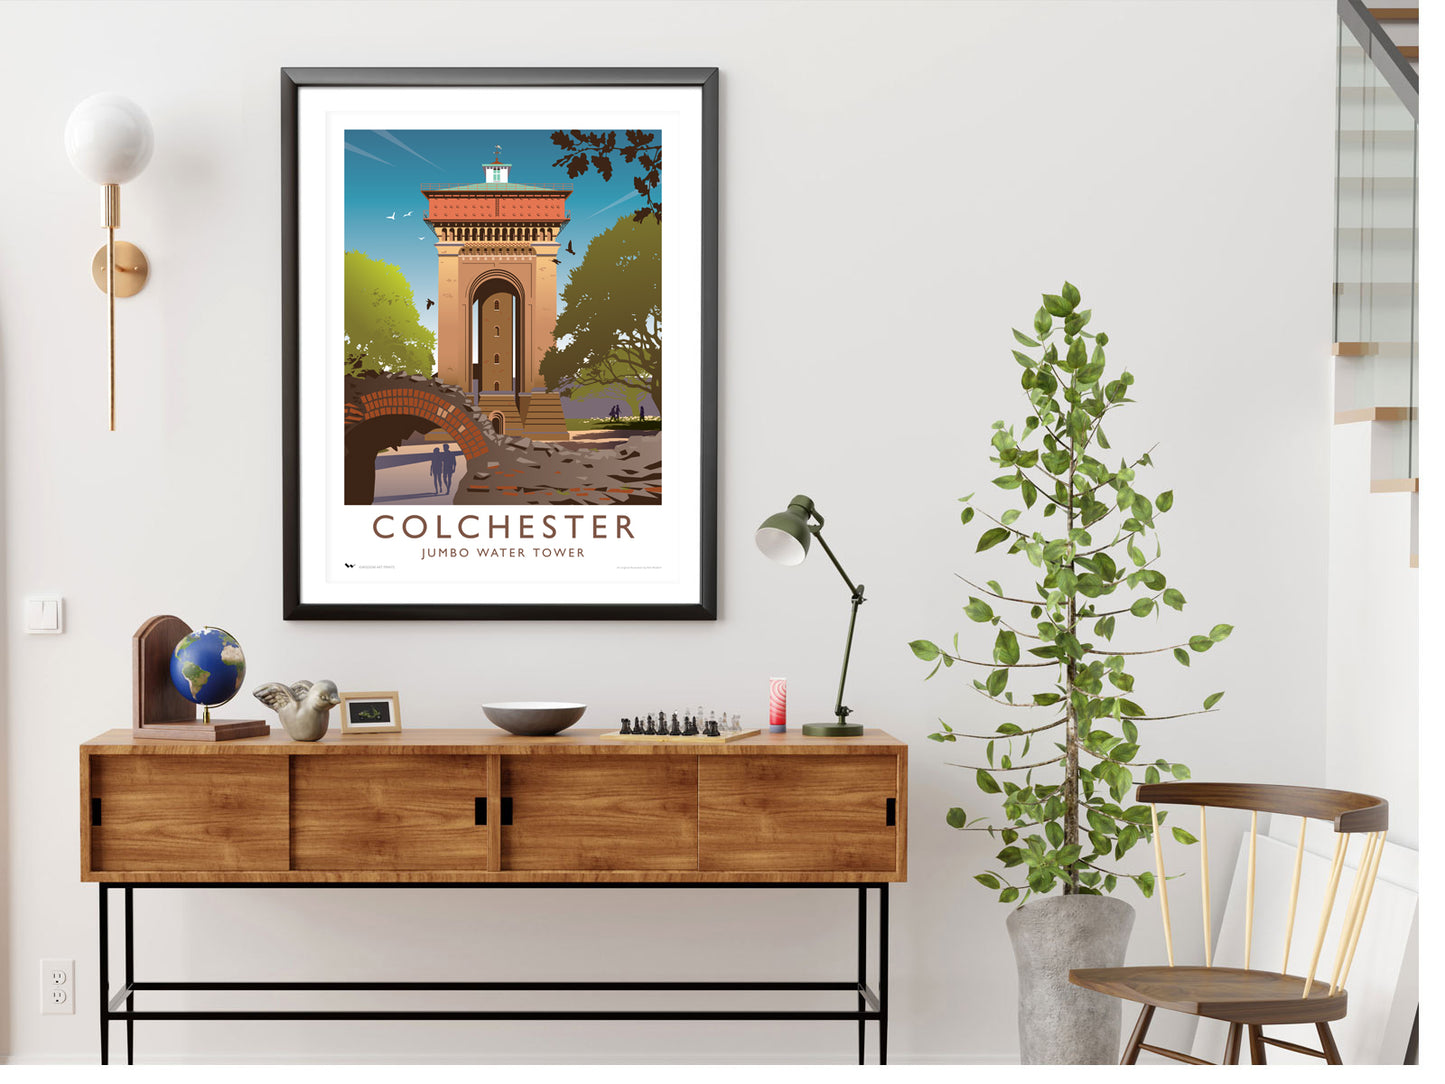 Jumbo Water Tower, Colchester Travel Poster